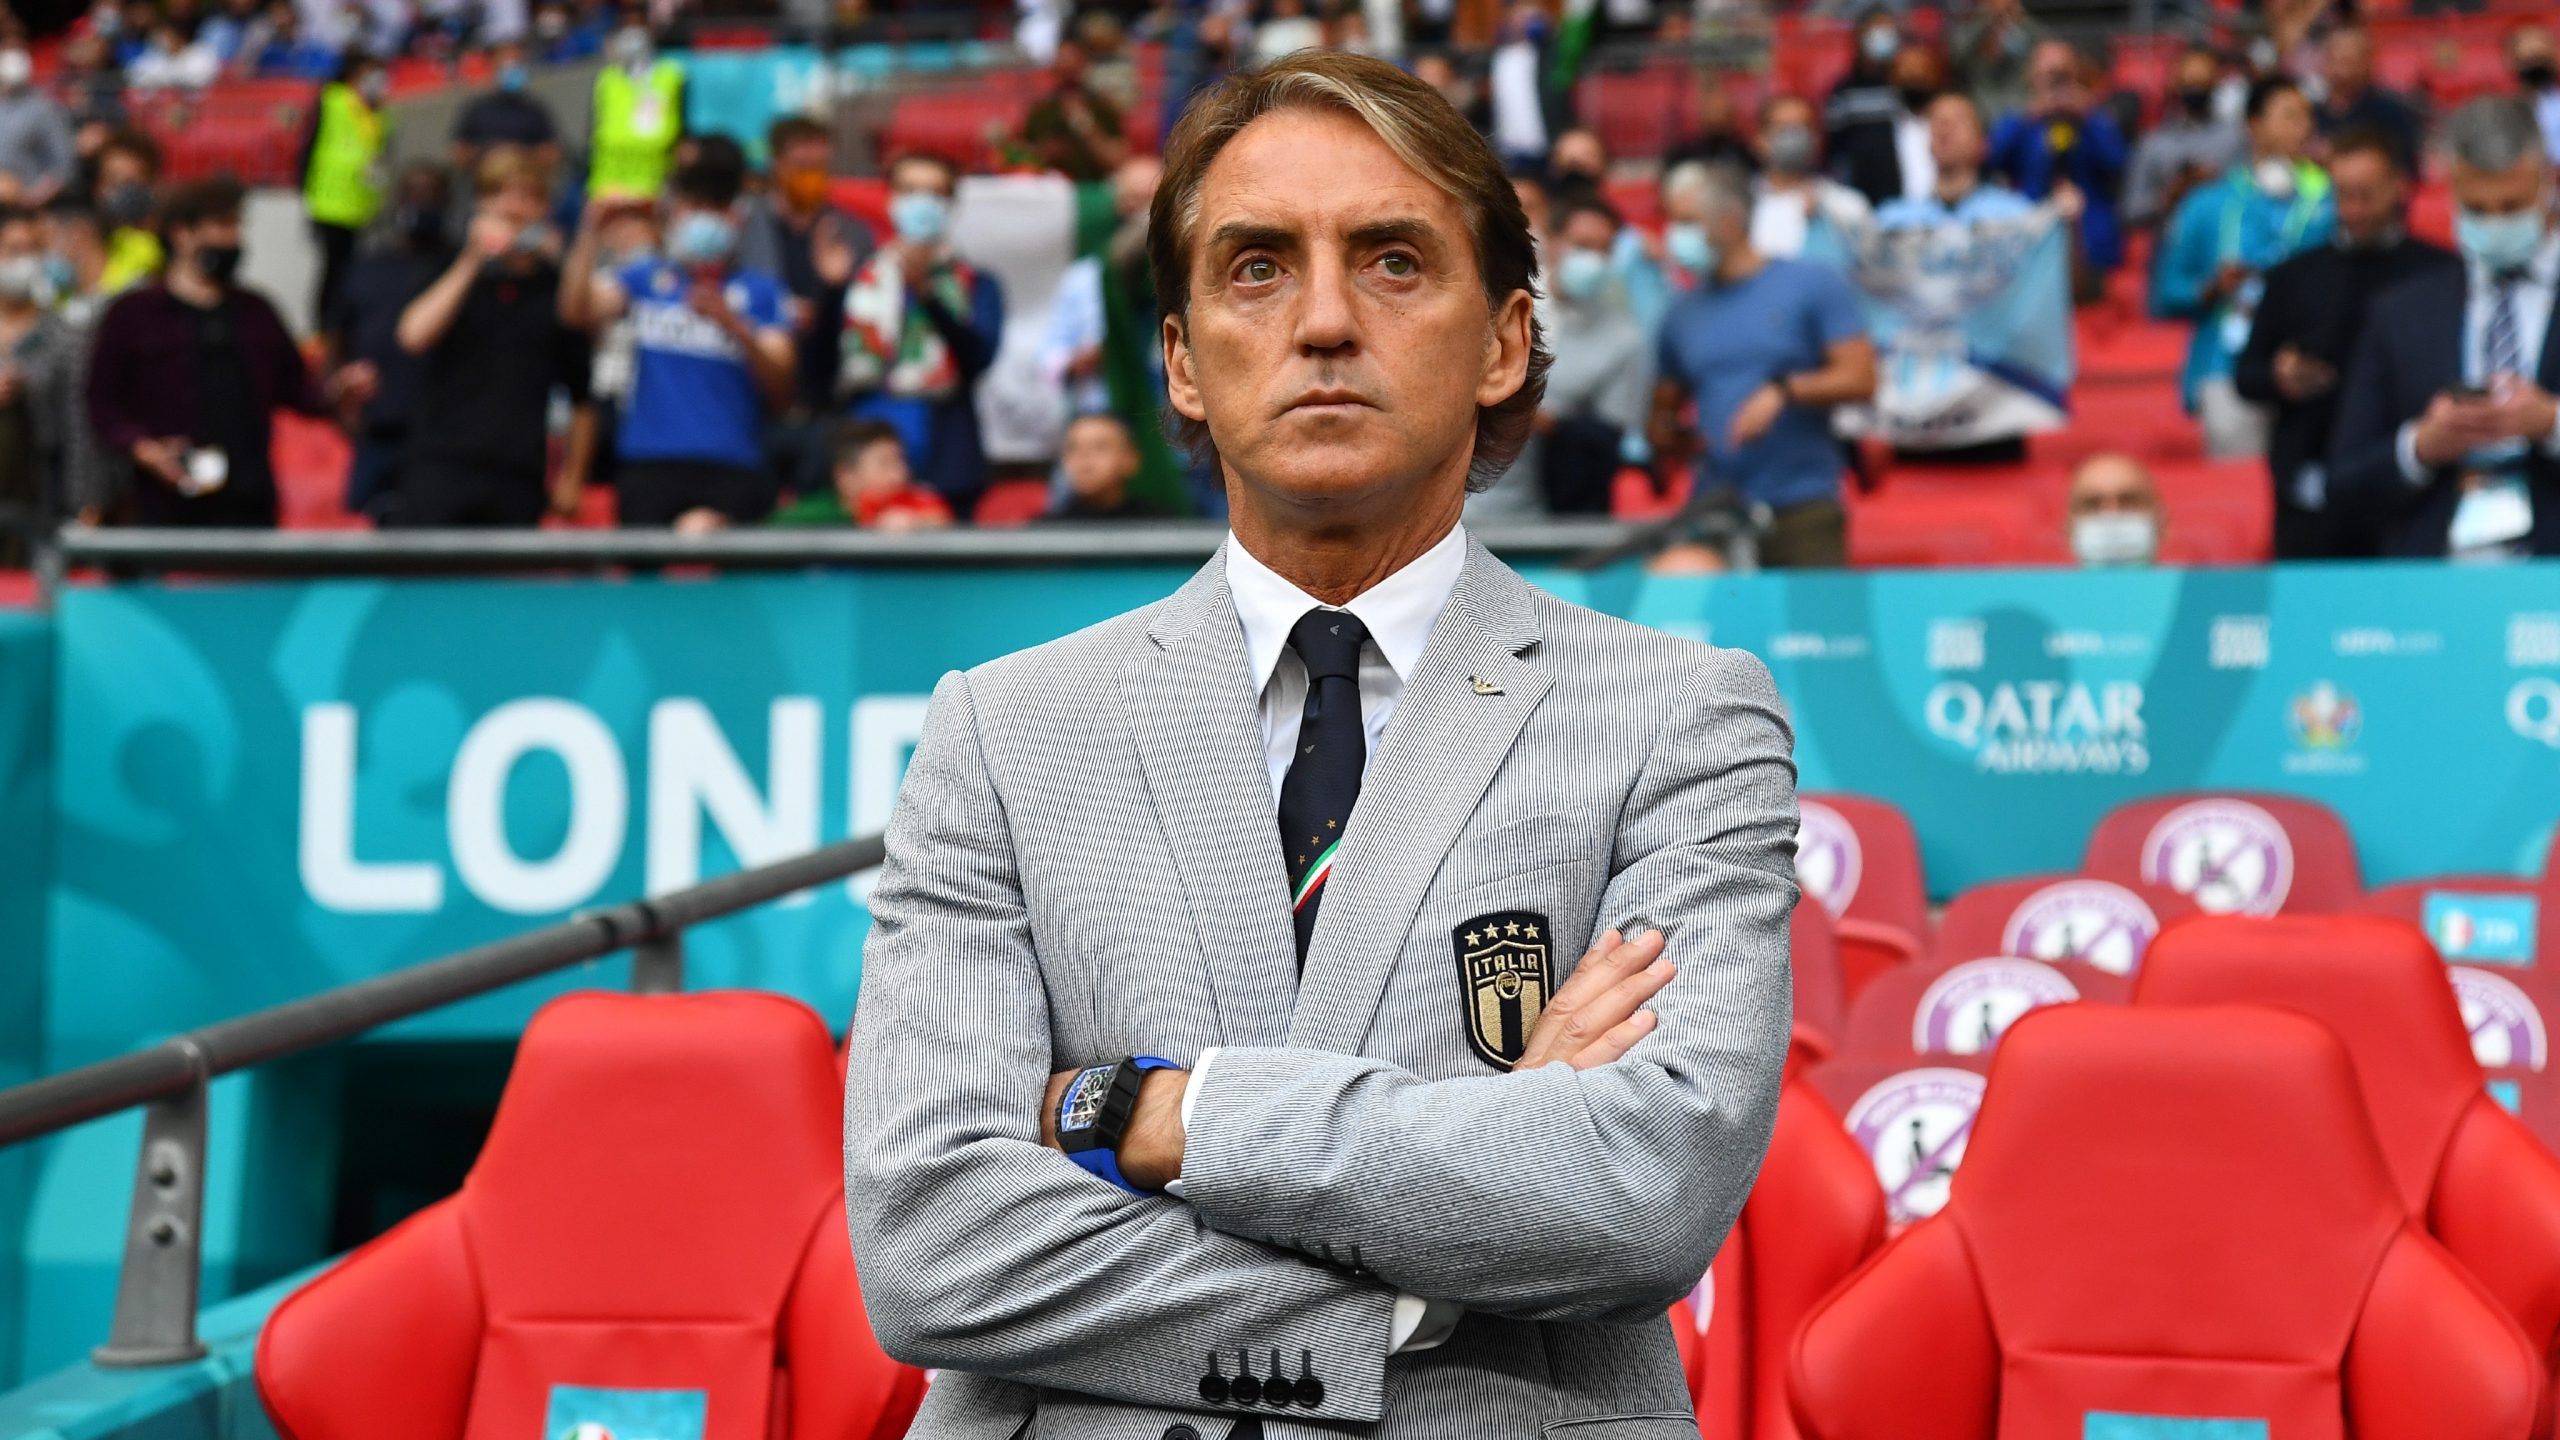 Roberto Mancini dismisses claims of verbal agreement with Premier League club amidst Manchester United links.